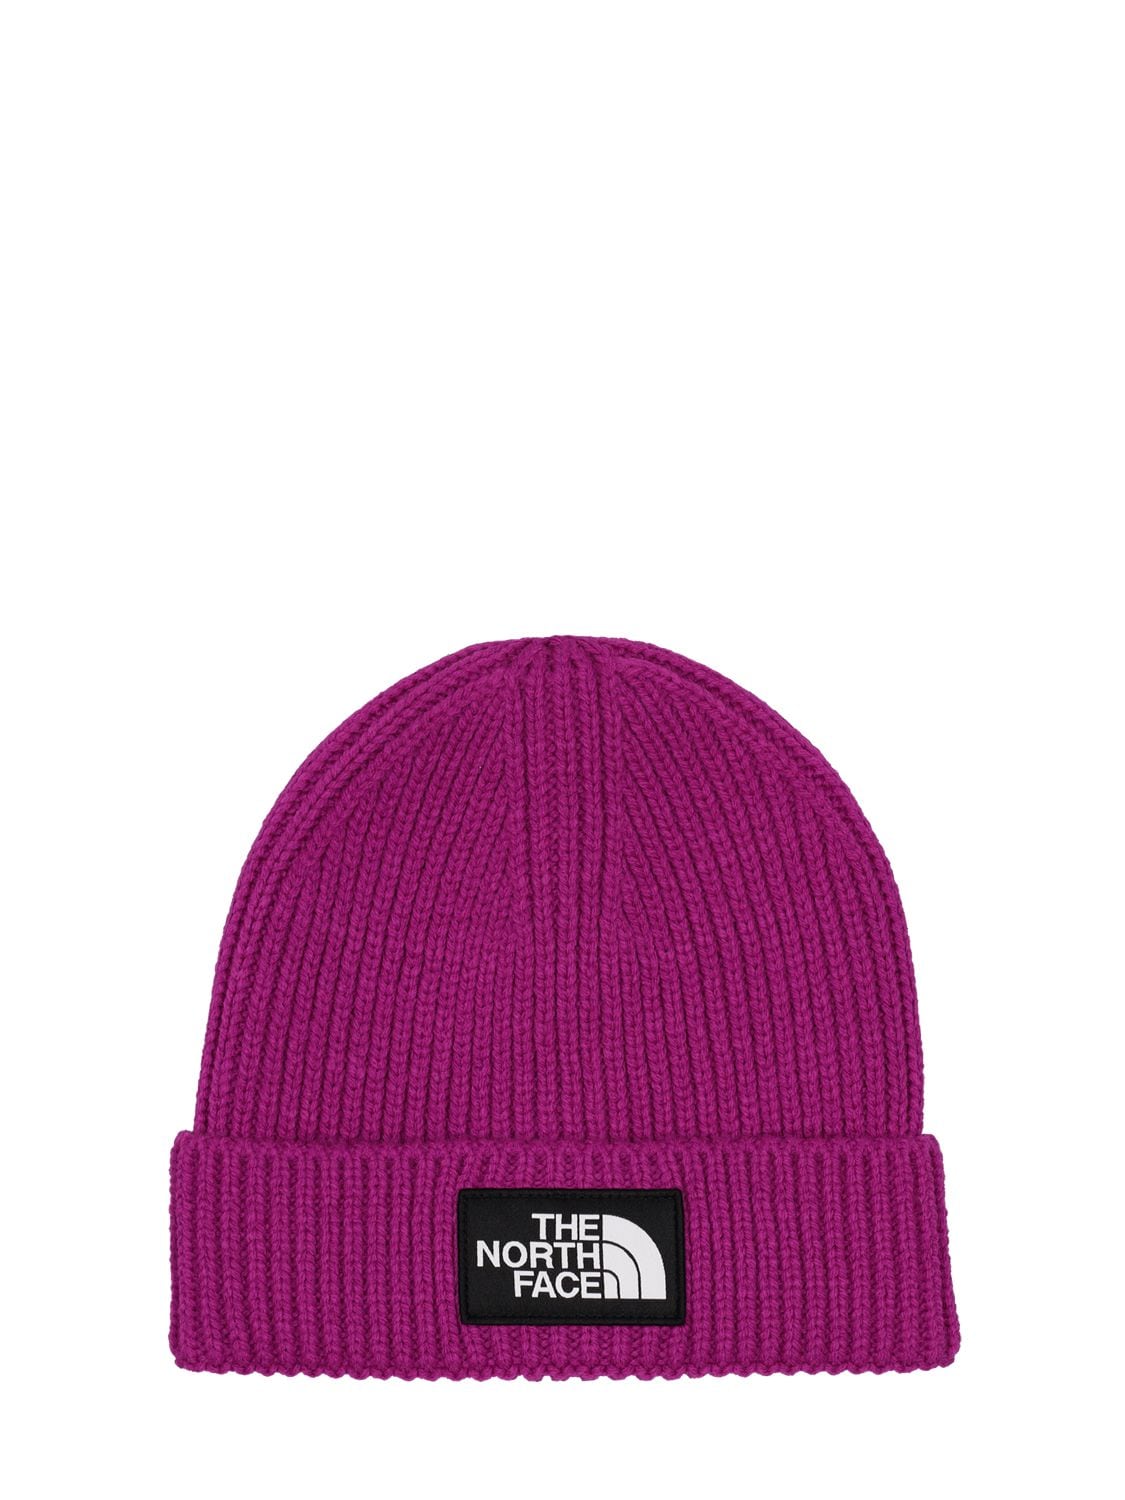 The North Face Logo Acrylic Blend Knit Beanie In Purple Cactus